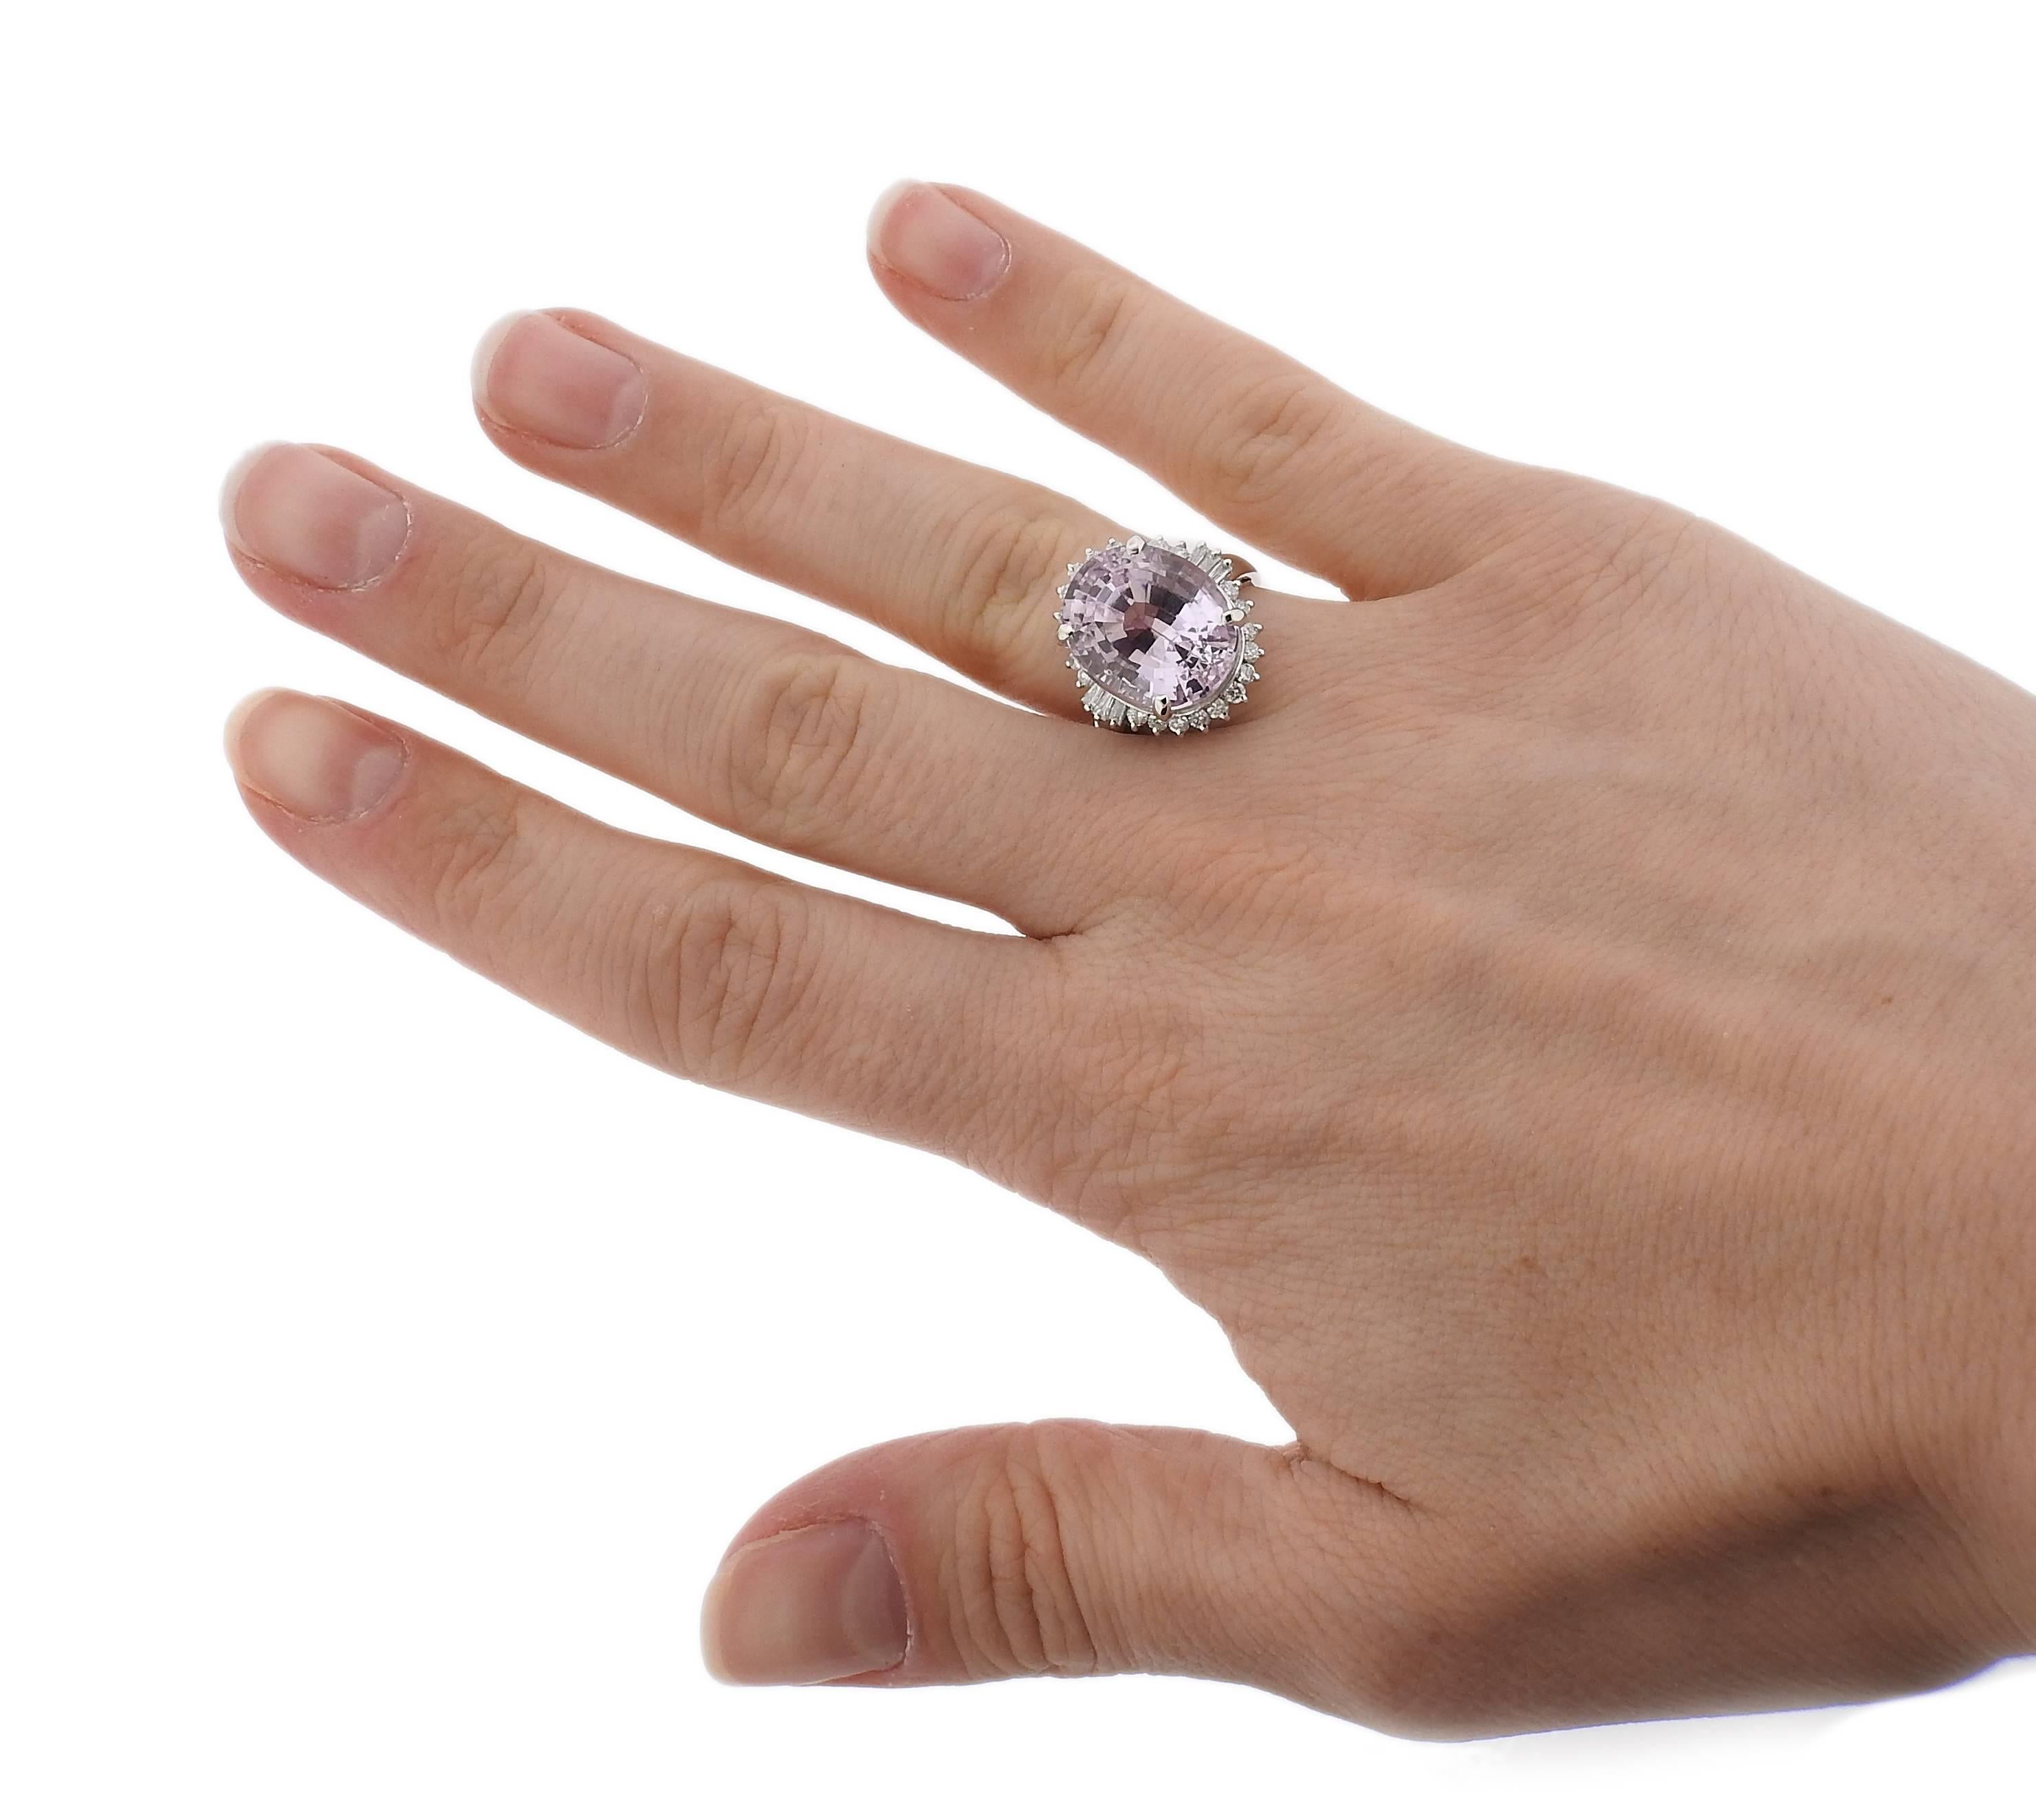 Platinum cocktail ring, set with a 13.82ct kunzite, surrounded with 0.57ctw in diamonds. Ring is a size - 6 1/4, ring top is 18mm x 16mm.  Marked: D057, pt900, 13.82.  Weight - 11.7 grams. 